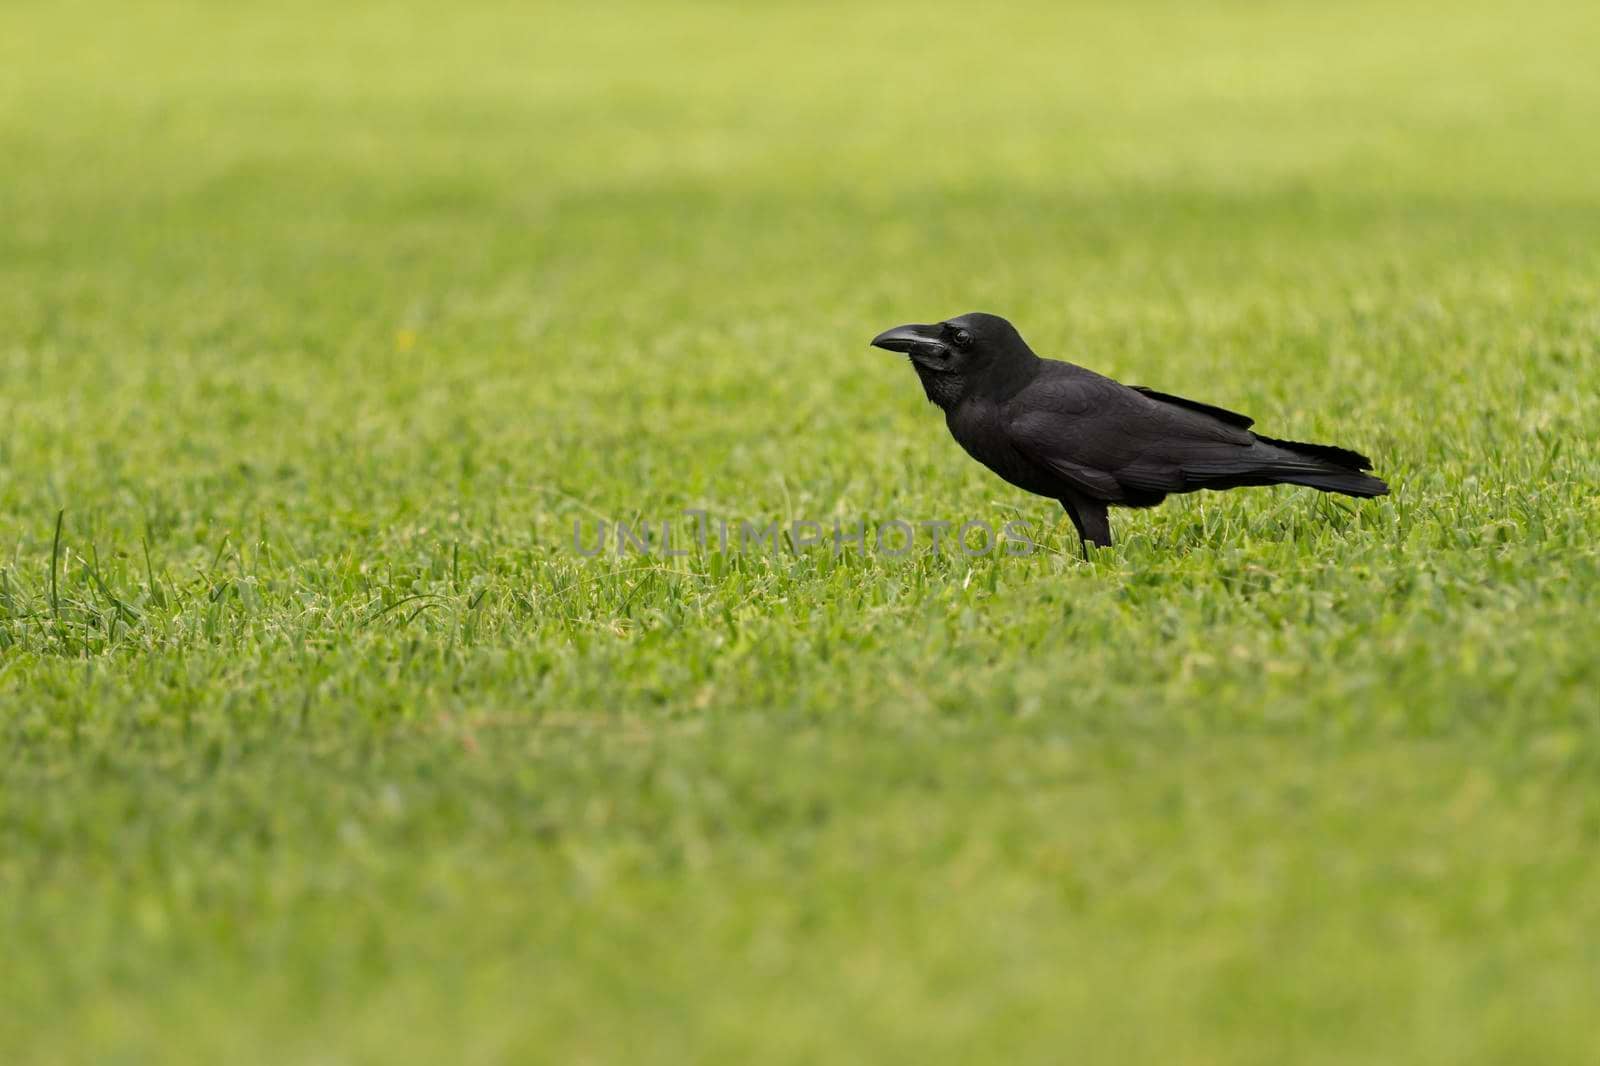 Black common raven or Corvus corax stands still on lawn with short green grass. by aksenovko